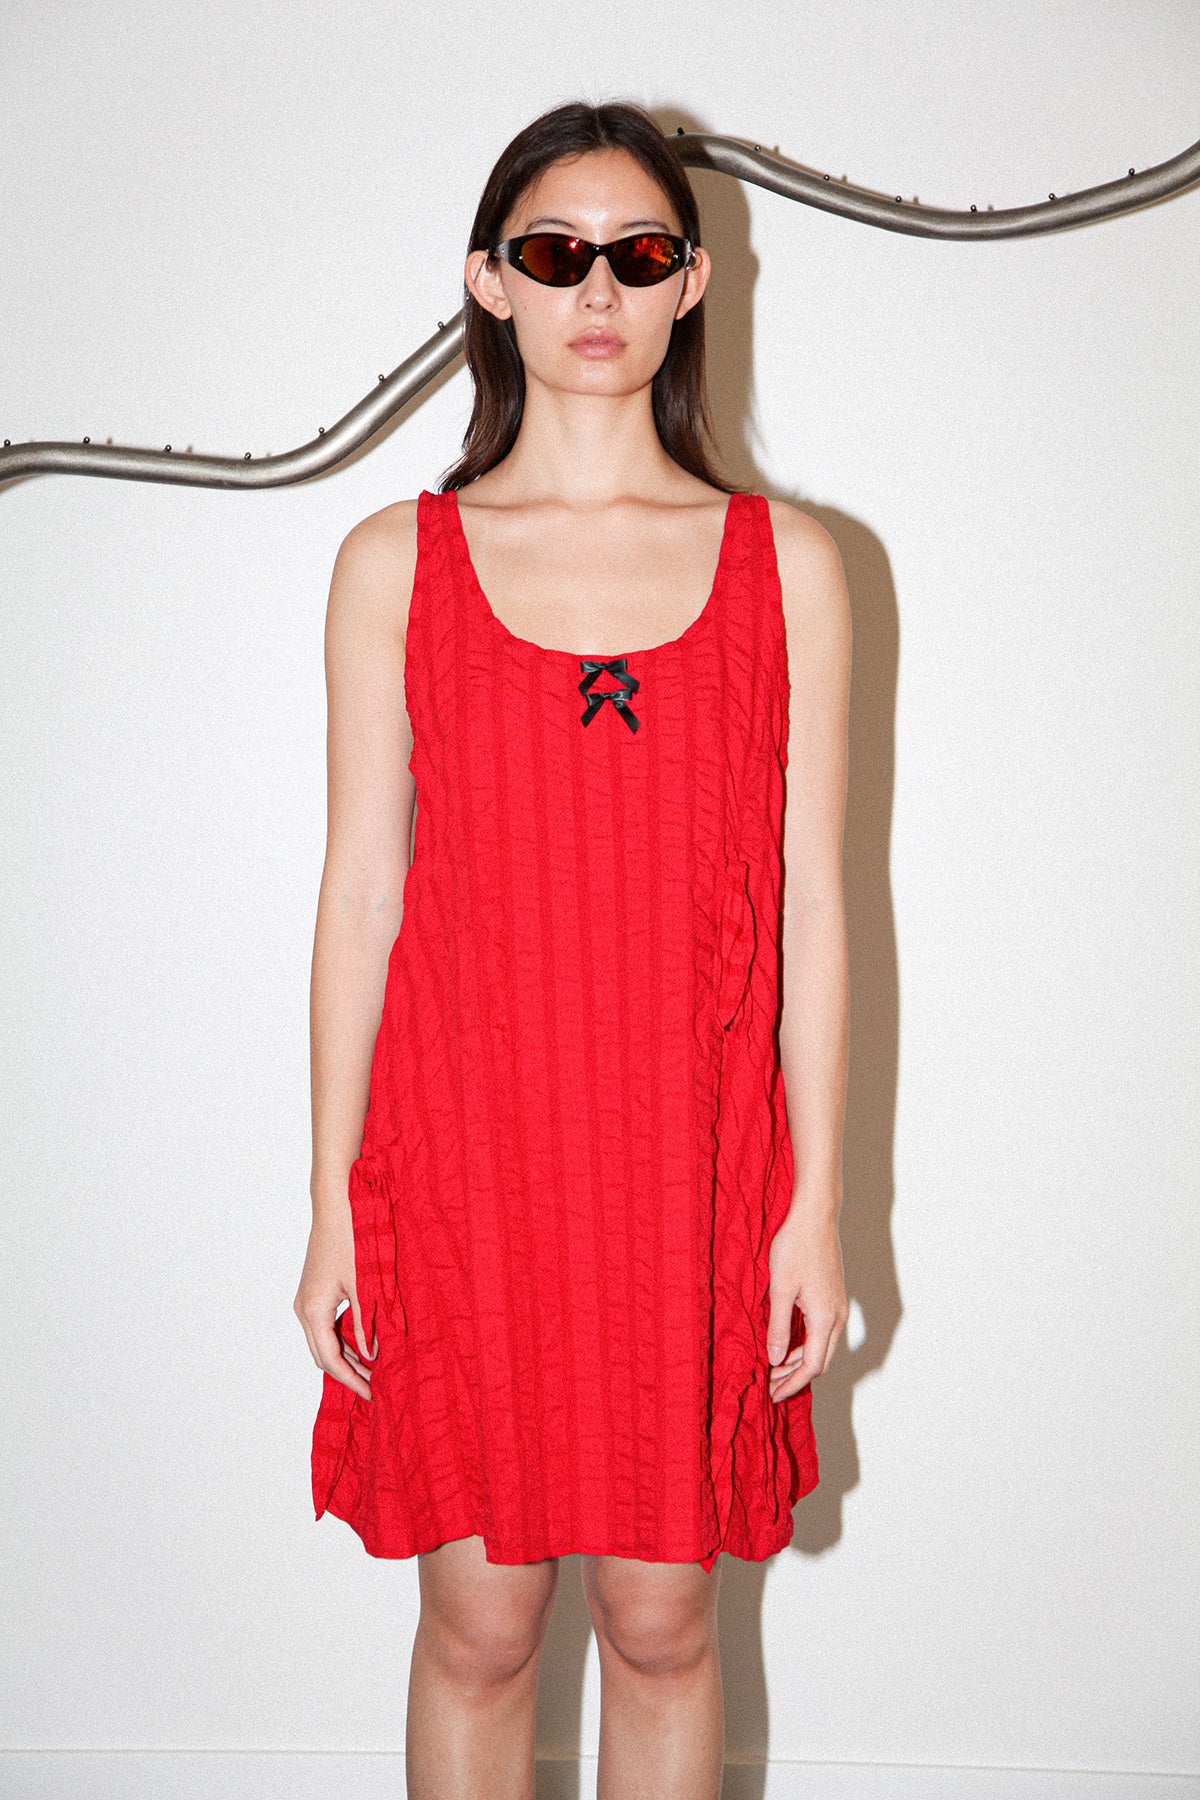 Knotted Slip in Chili Pepper